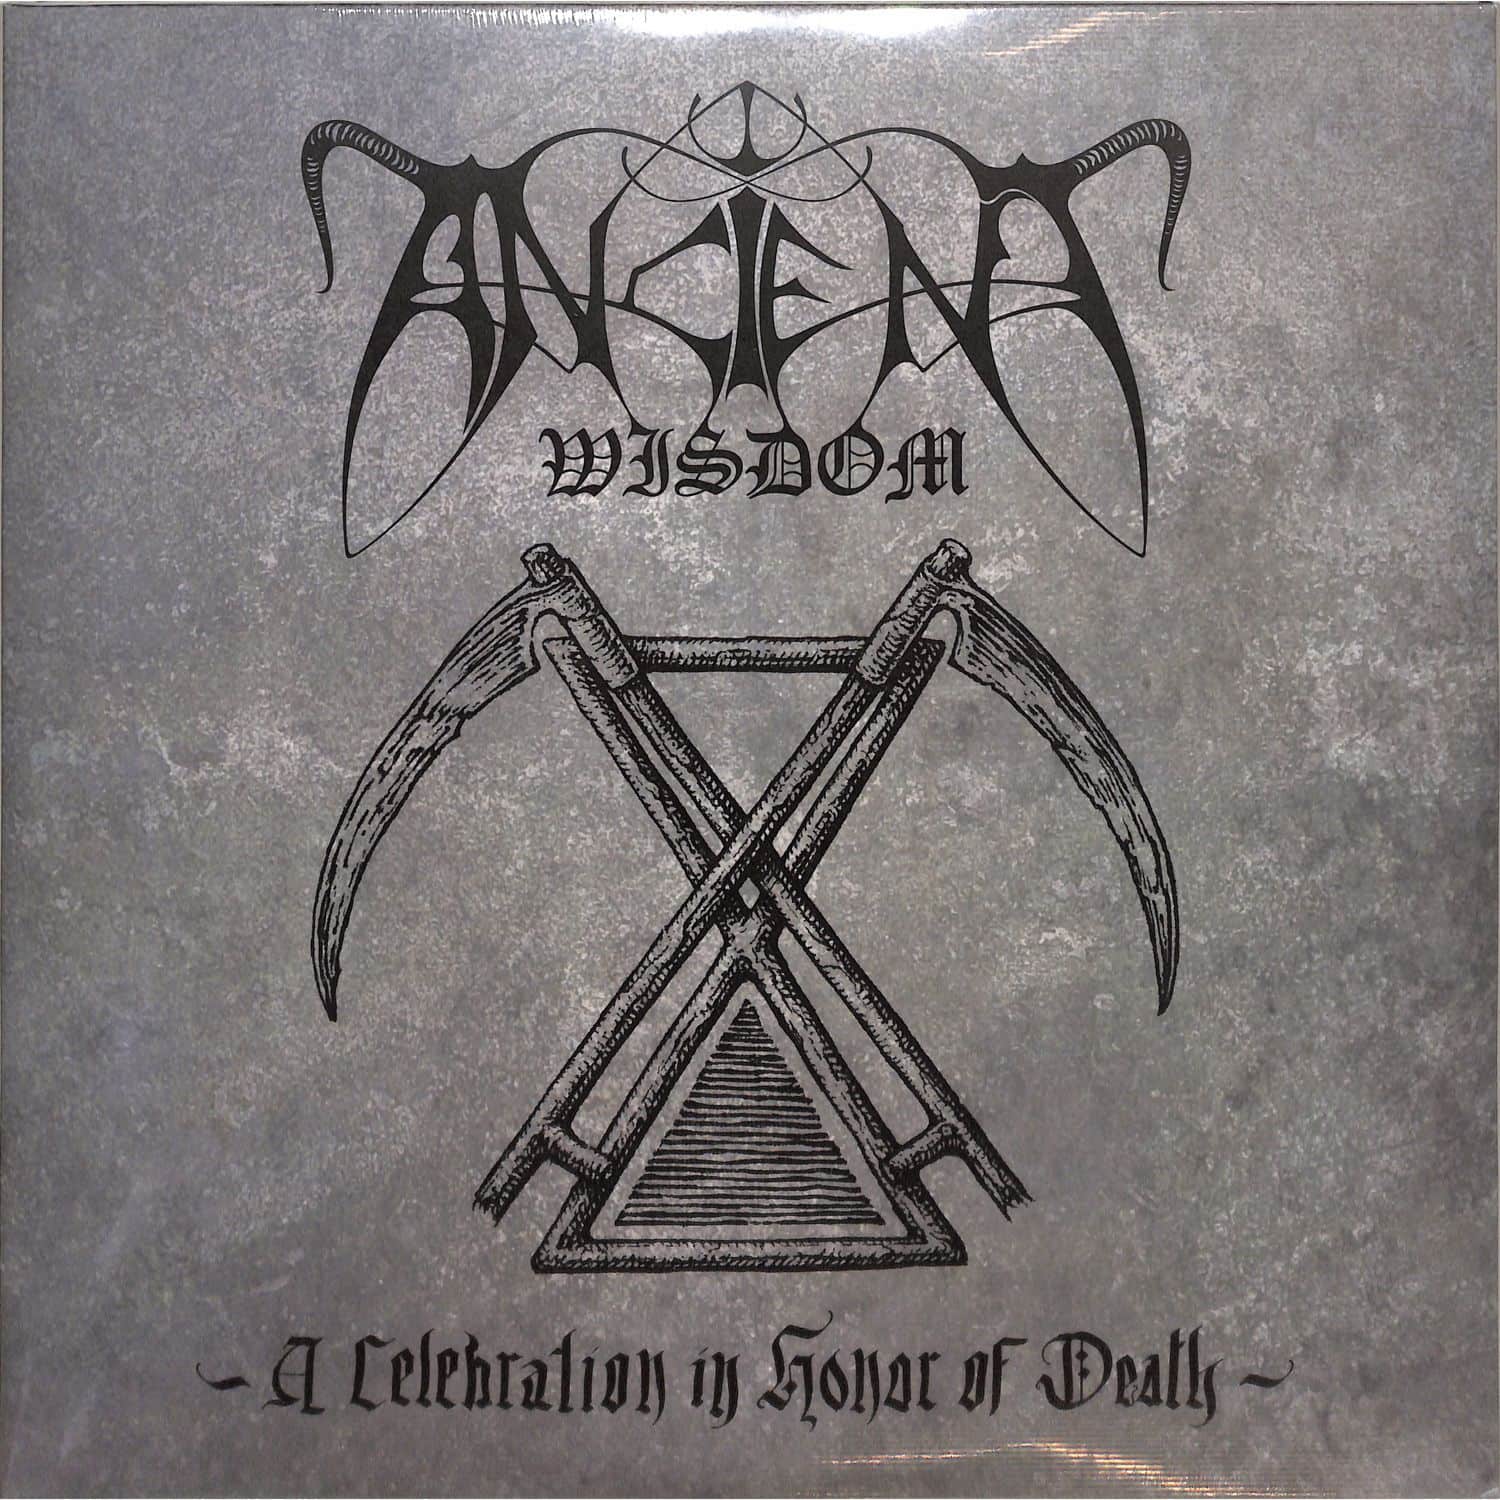 Ancient Wisdom - A CELEBRATION IN HONOR OF DEATH 